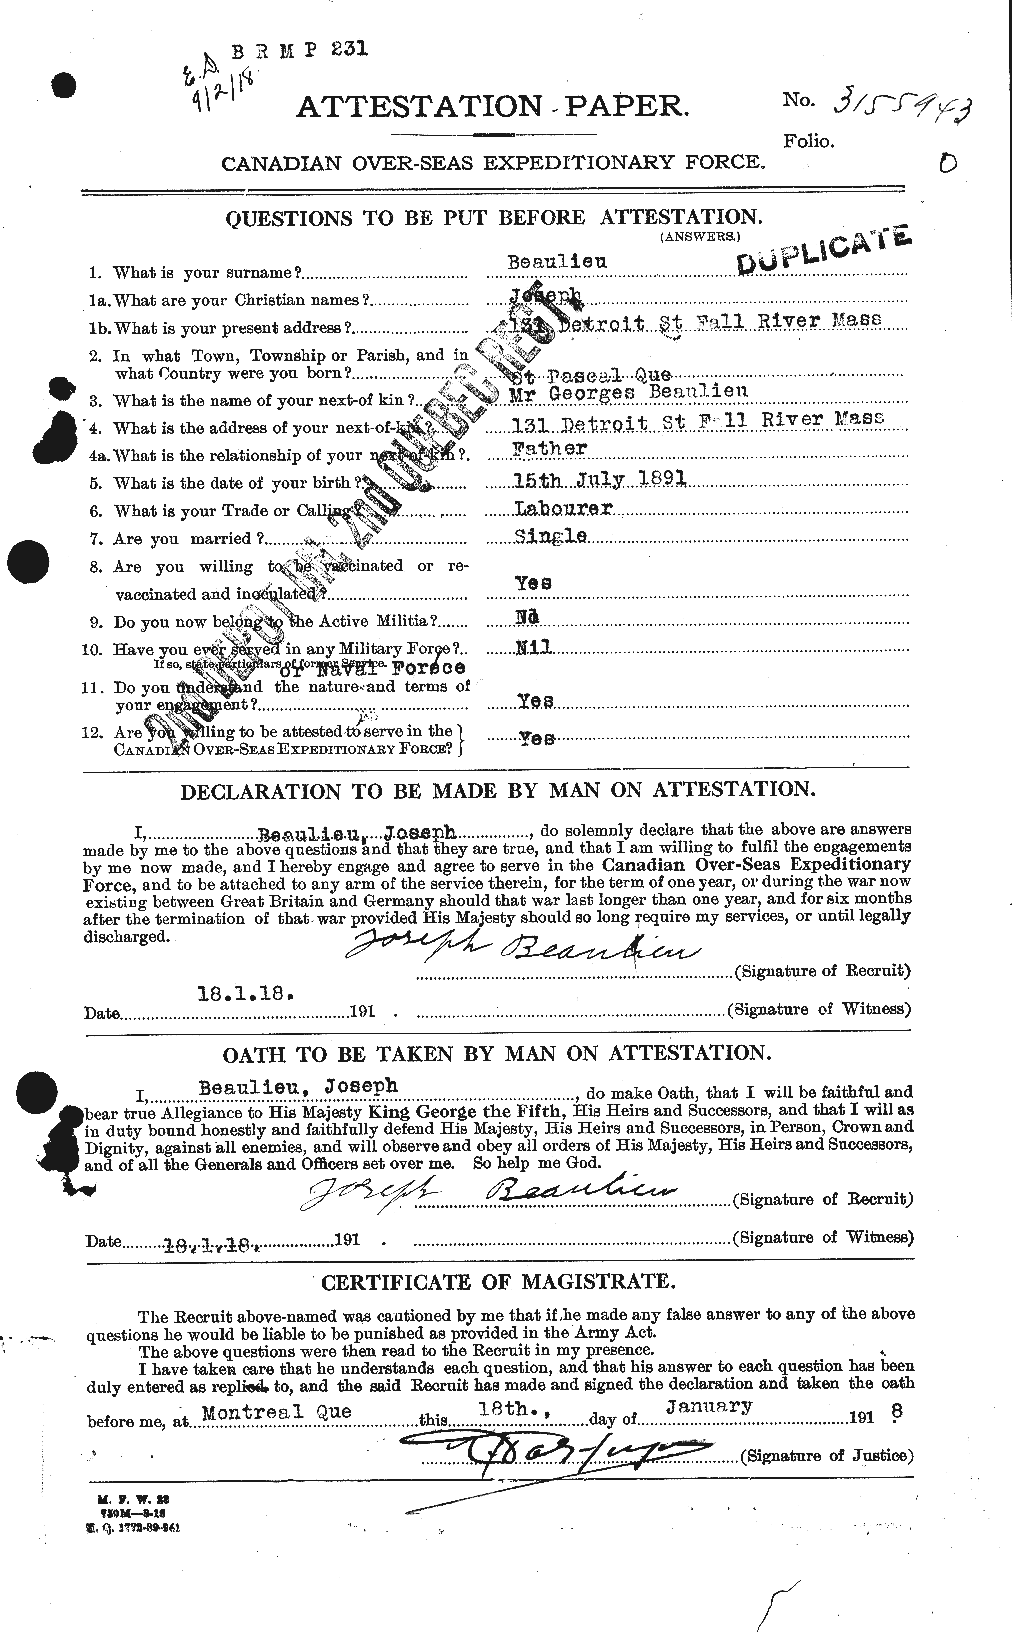 Personnel Records of the First World War - CEF 231538a